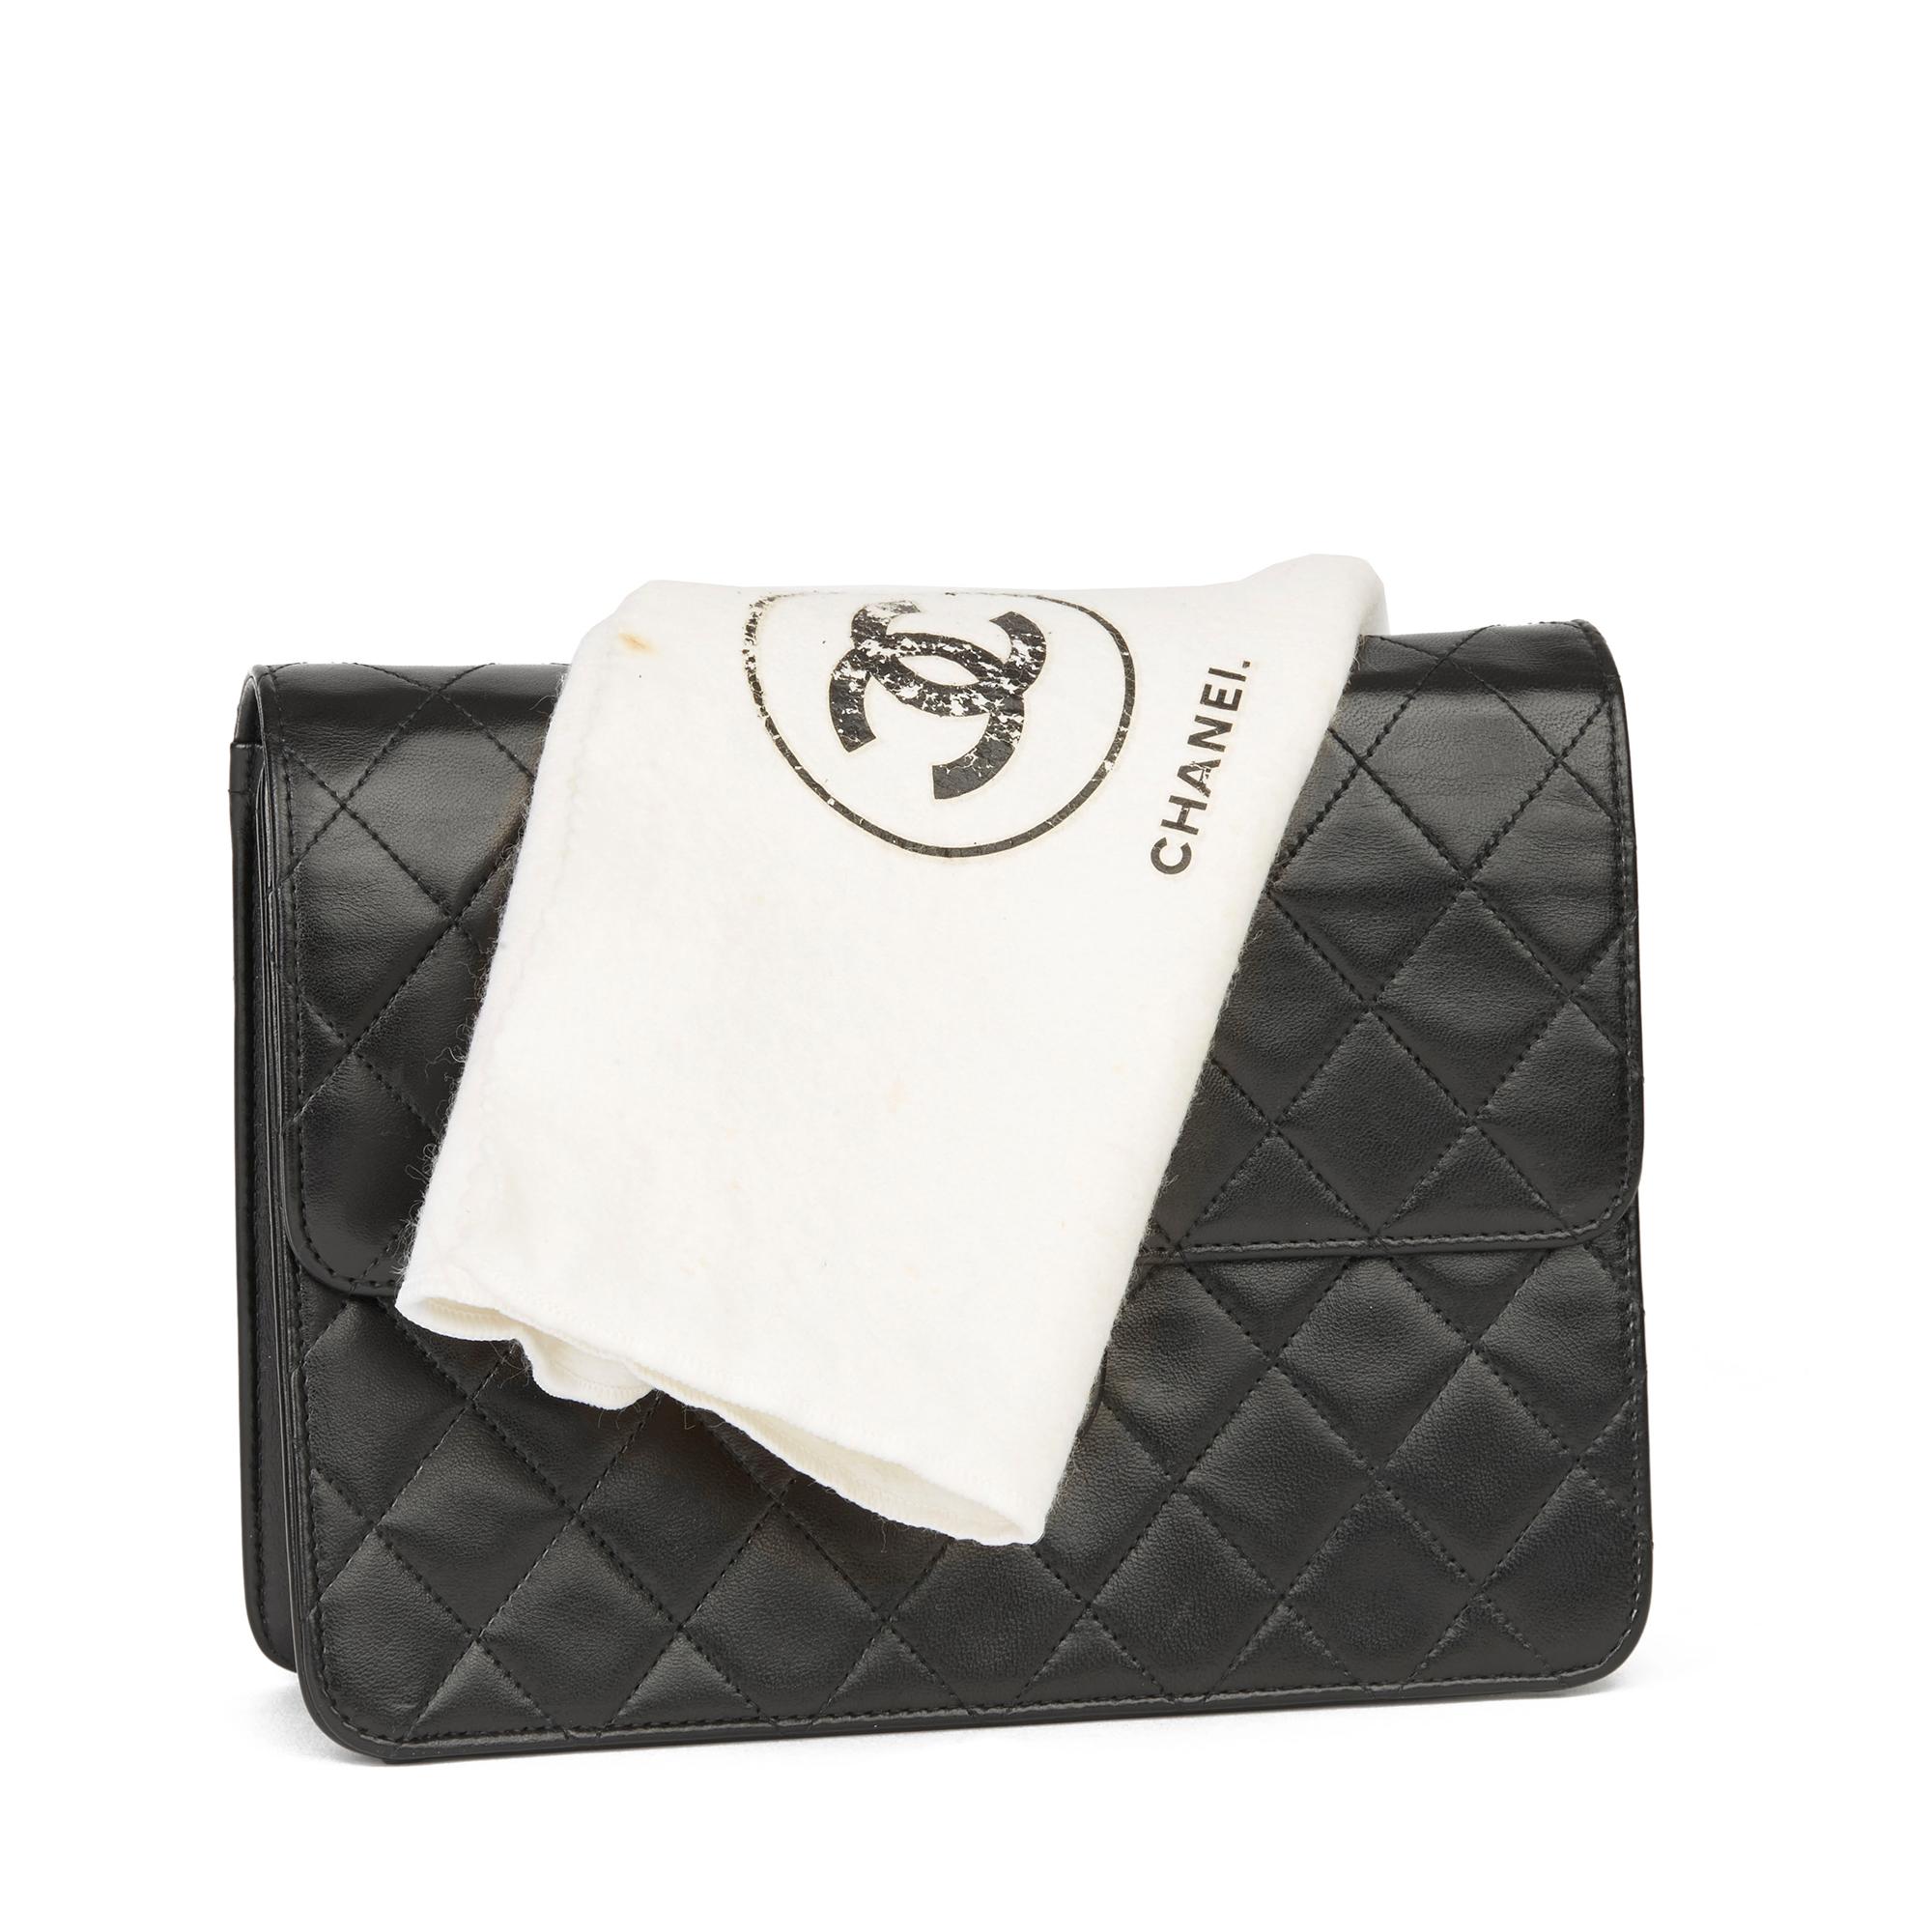 1994 Chanel Black Quilted Lambskin Vintage Small Classic Single Flap Bag 5